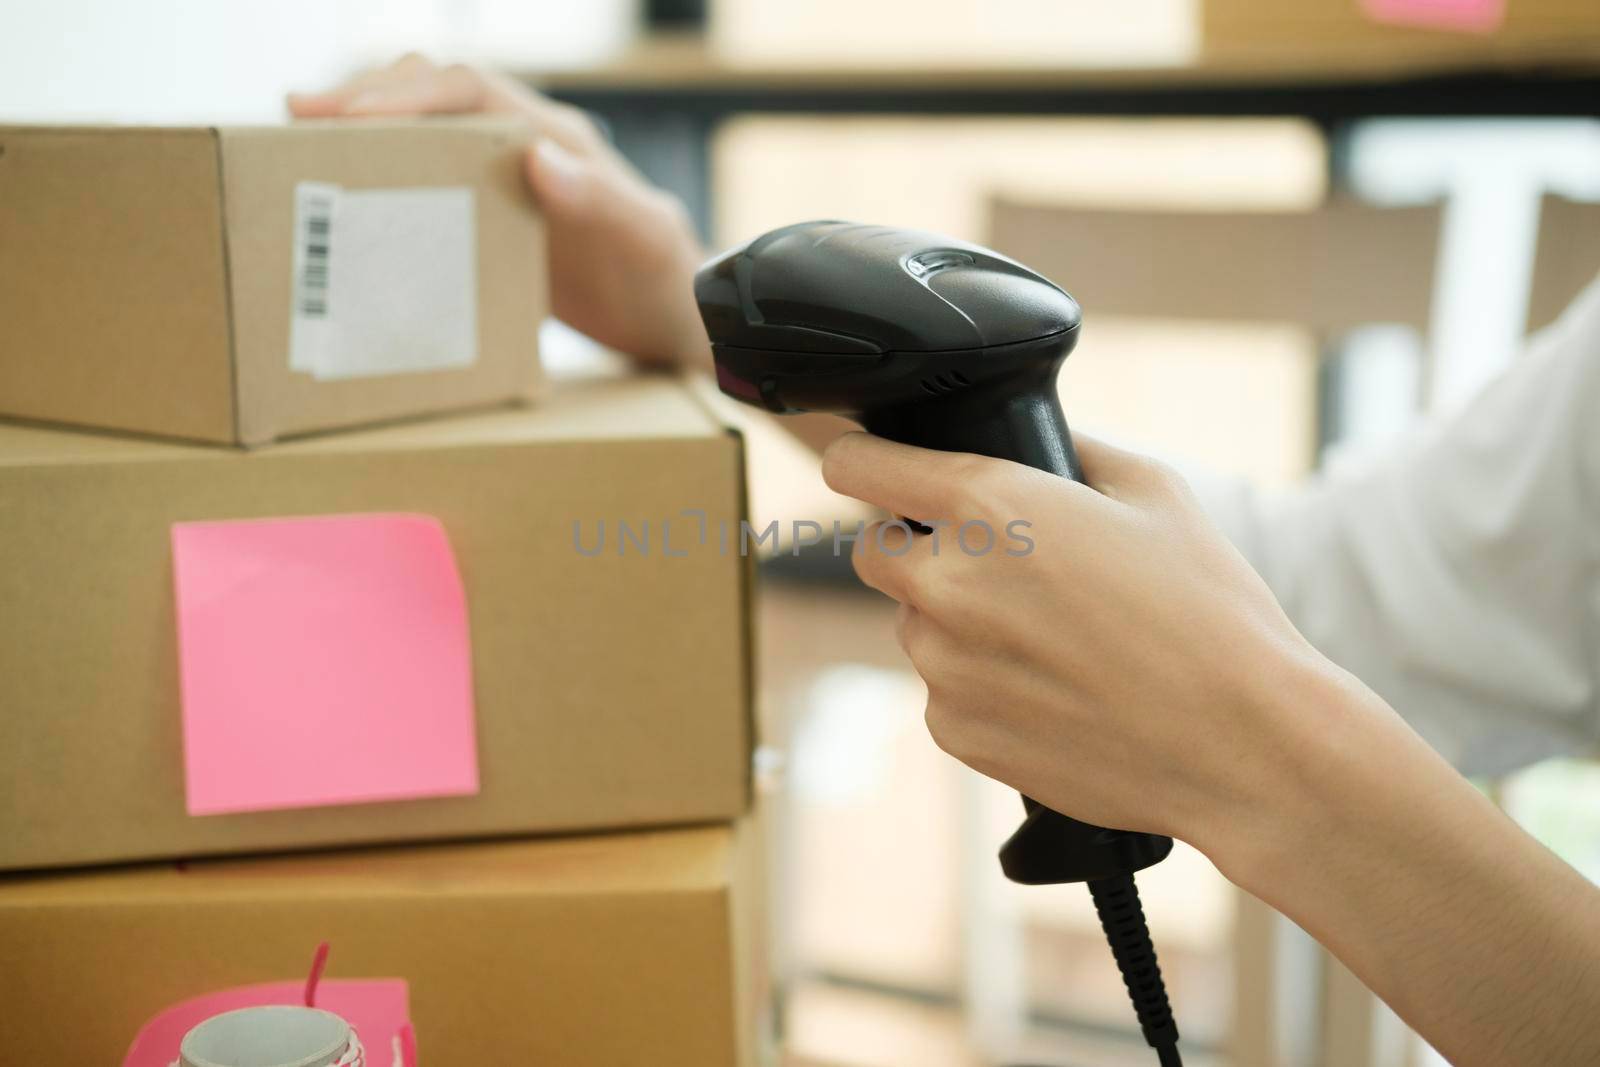 Female small online business owner holding scanner scanning parcel barcode tag before shipment at workplace. Woman selling products online, scanning parcel barcode. Online business concept.